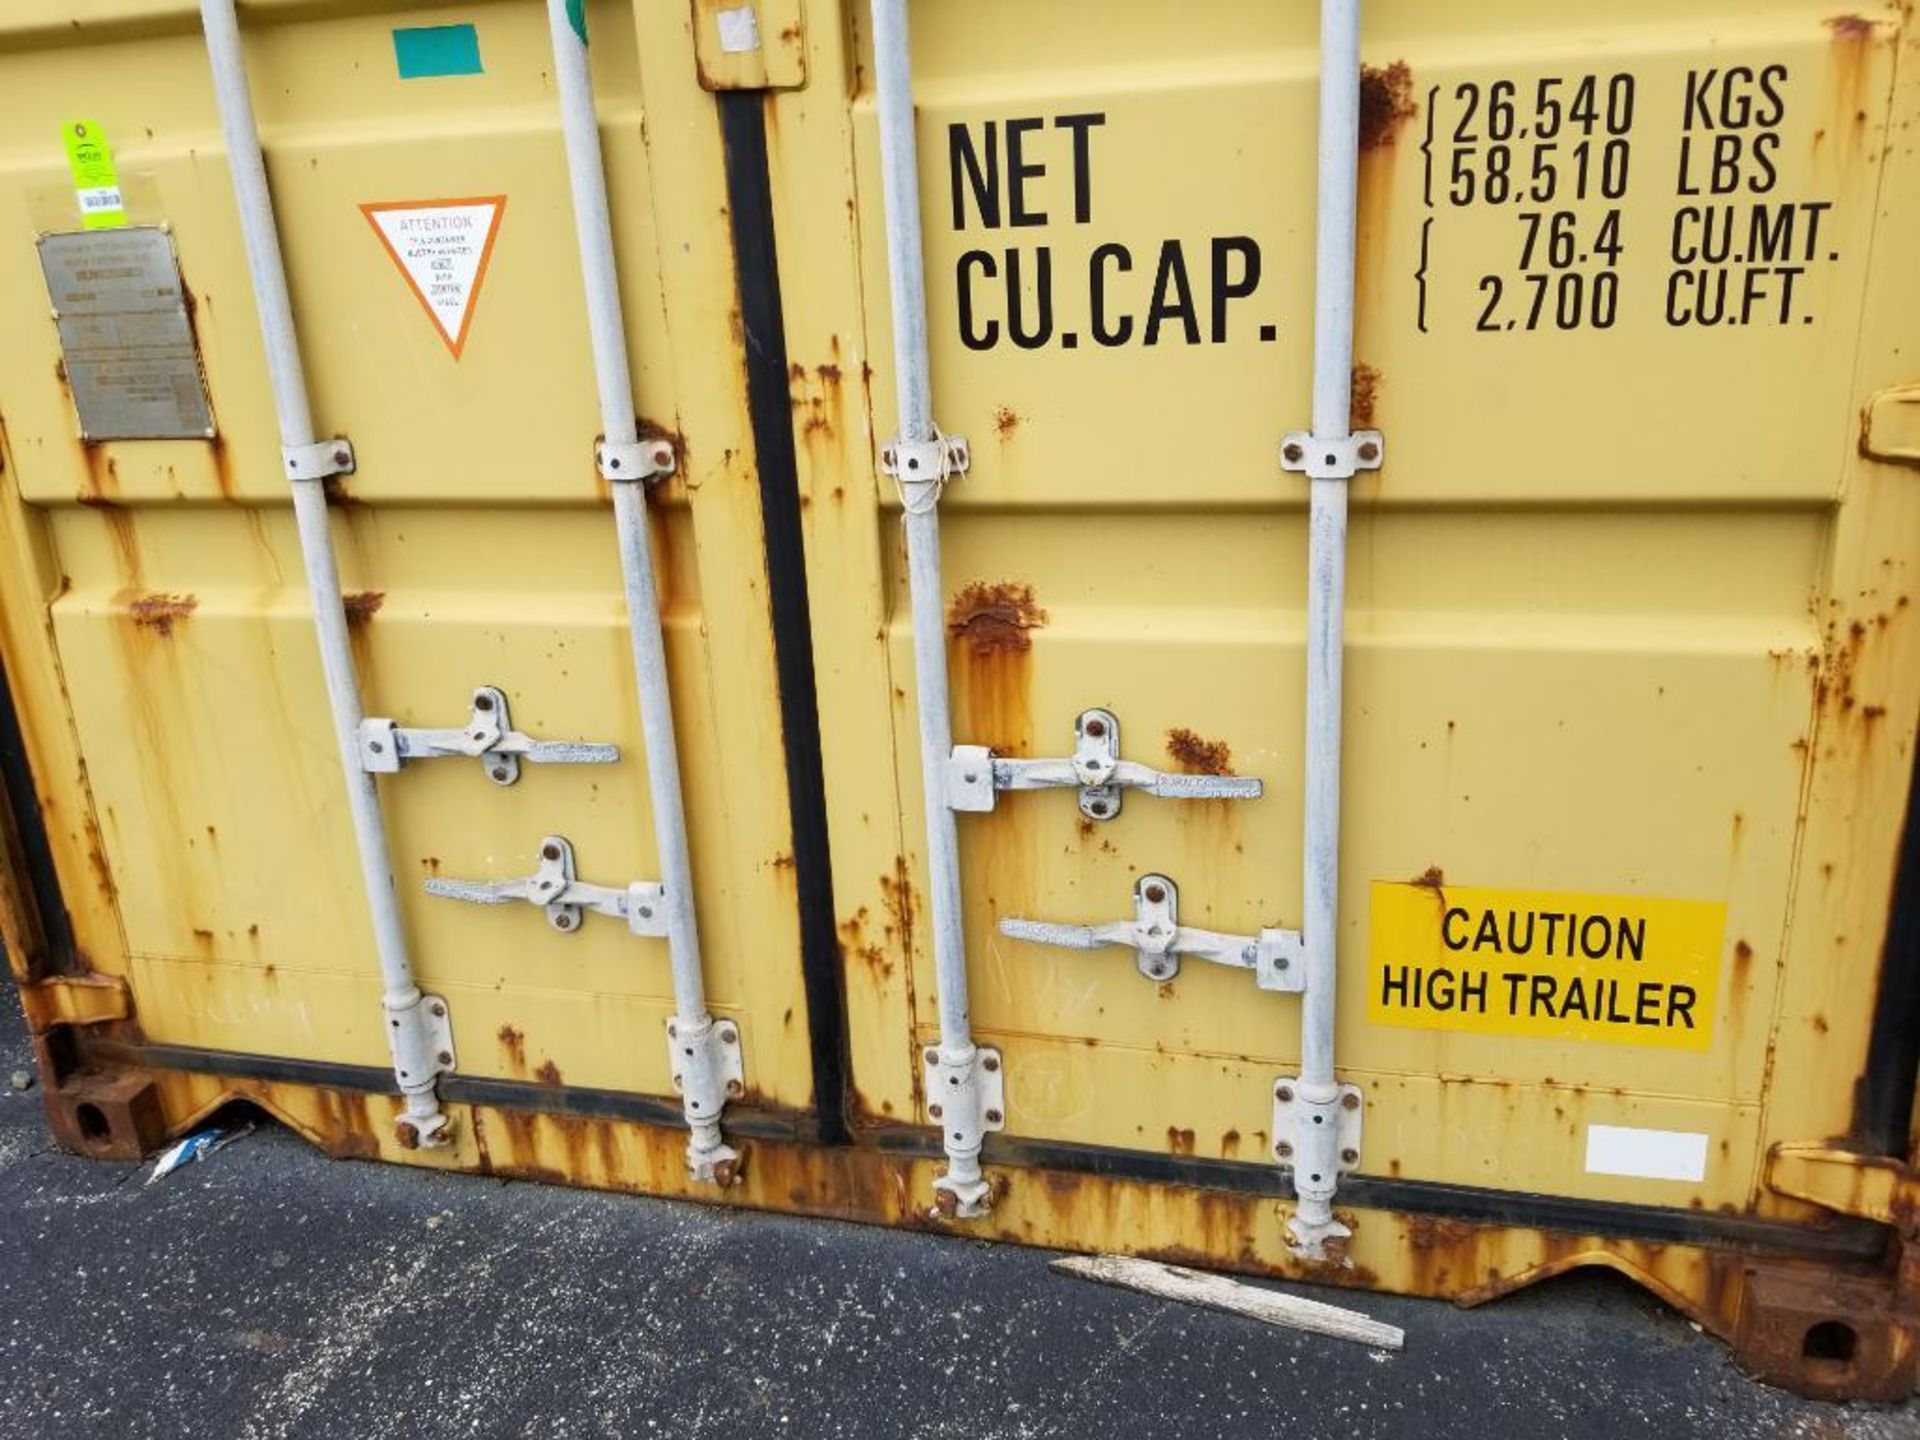 2006 Storage container. 40ft length. 9ft 6in tall. Type NL40H-181A. Max gross weight 67,200lbs. - Image 9 of 9